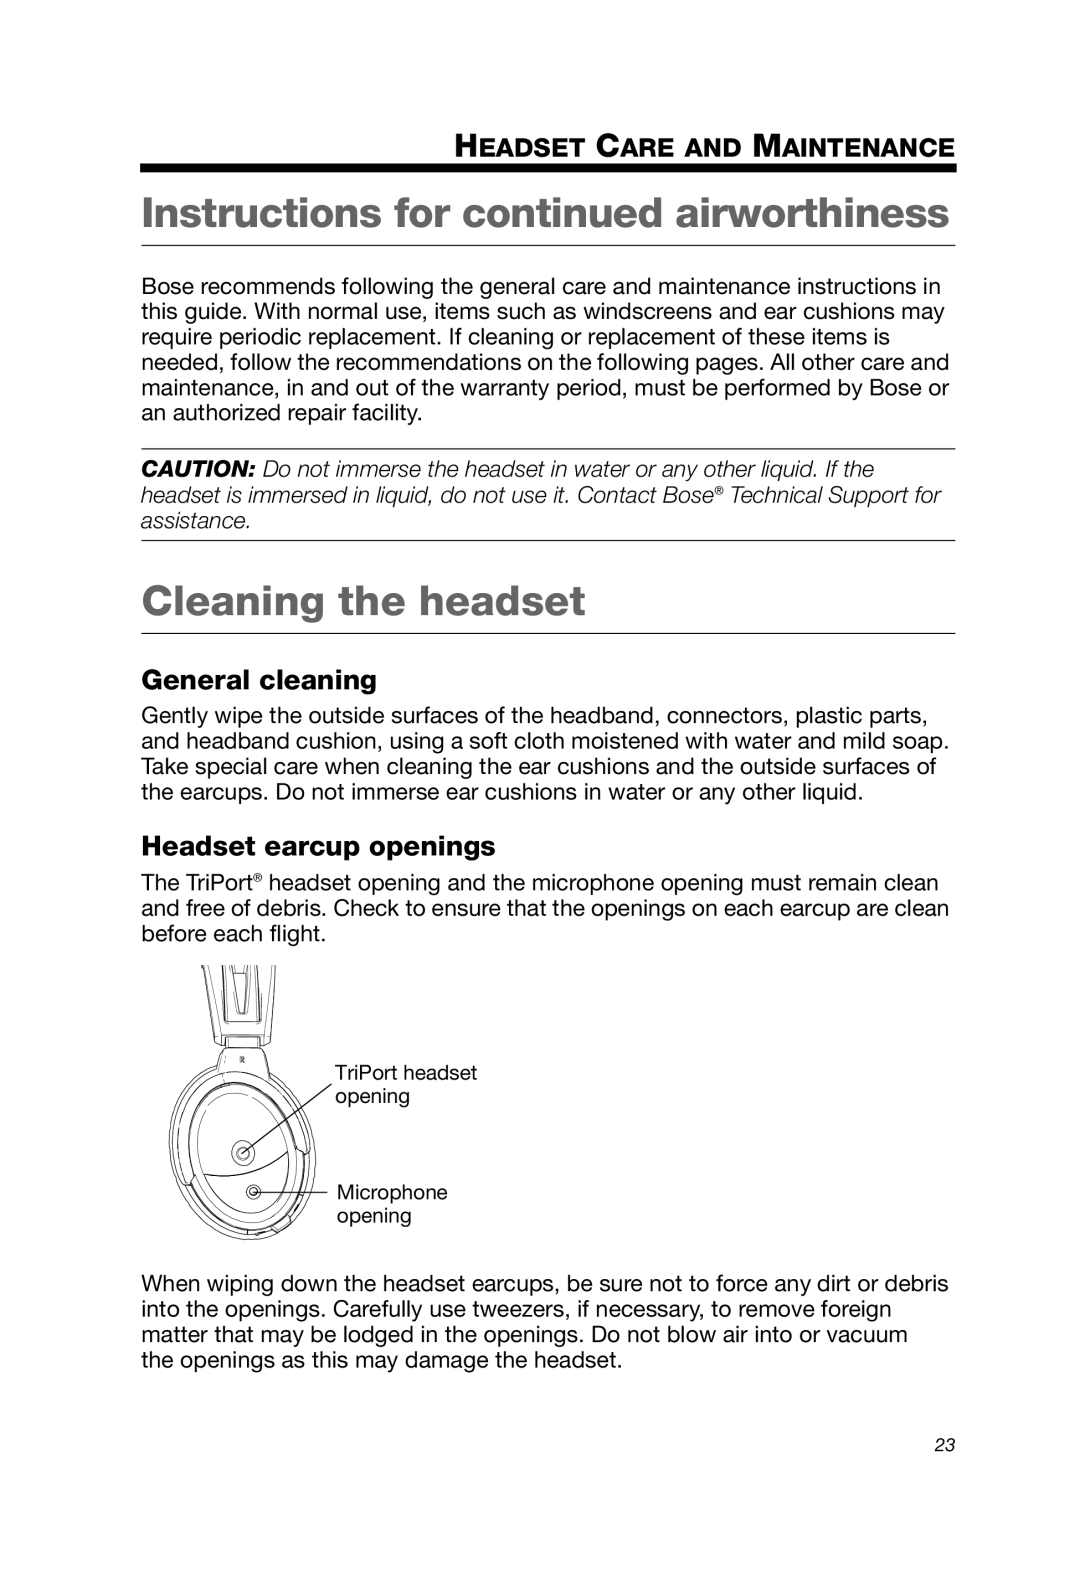 Bose A20 manual Instructions for continued airworthiness, Cleaning the headset, General cleaning, Headset earcup openings 